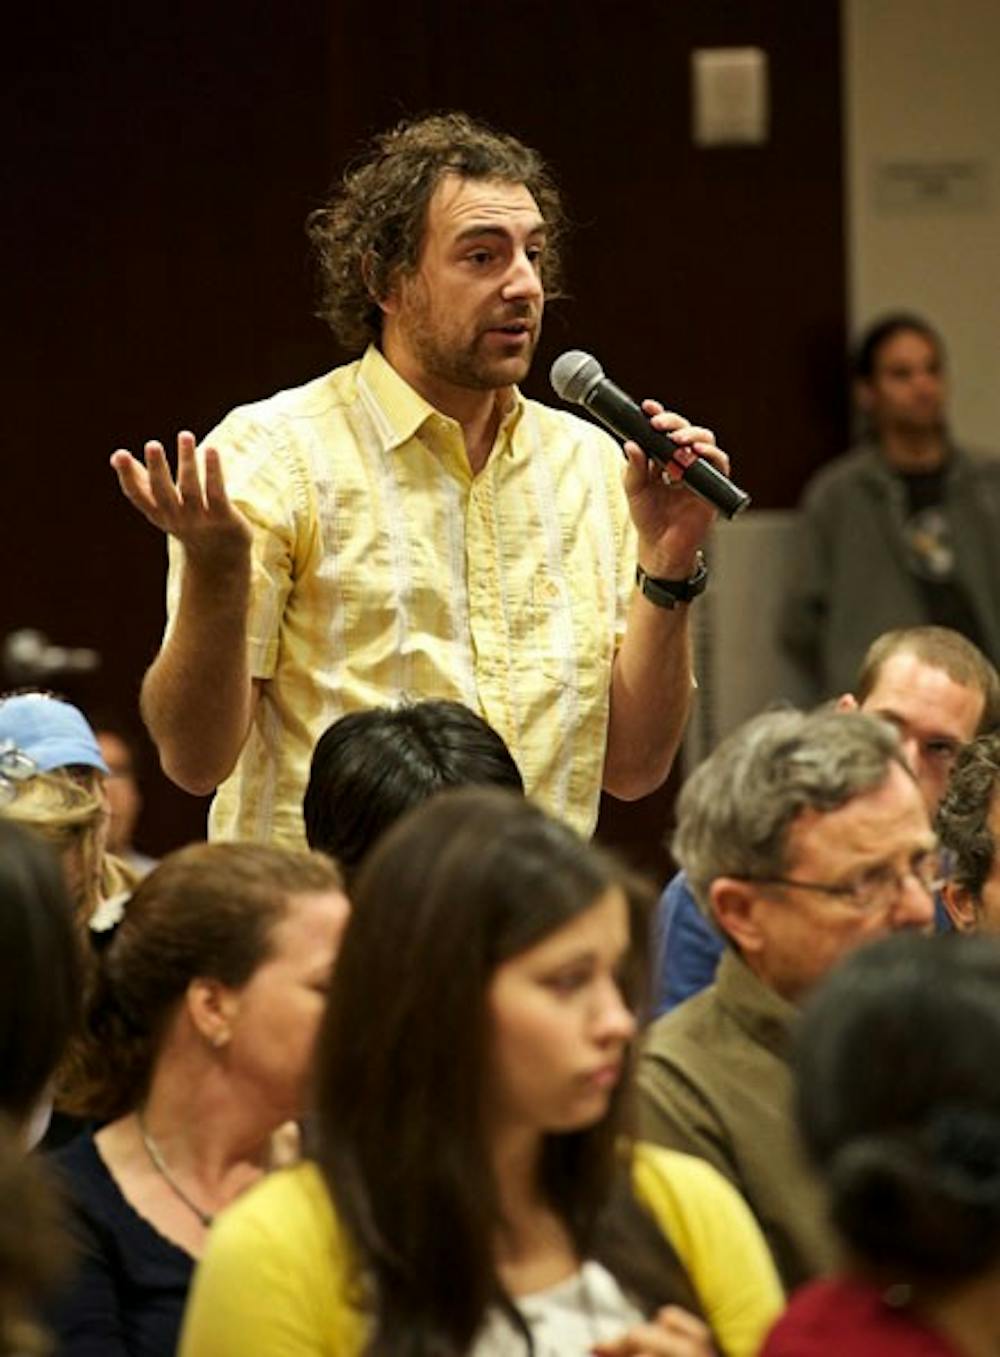 FUTURE OF GRAD STUDENTS: Fereico Waitoller, a graduate student at ASU, questions the panel of deans during a forum to discuss the disbanding of several of ASU's residential college programs. The audience was filled with many graduate students concerned with the future of their current studies. (Photo by Michael Arellano)